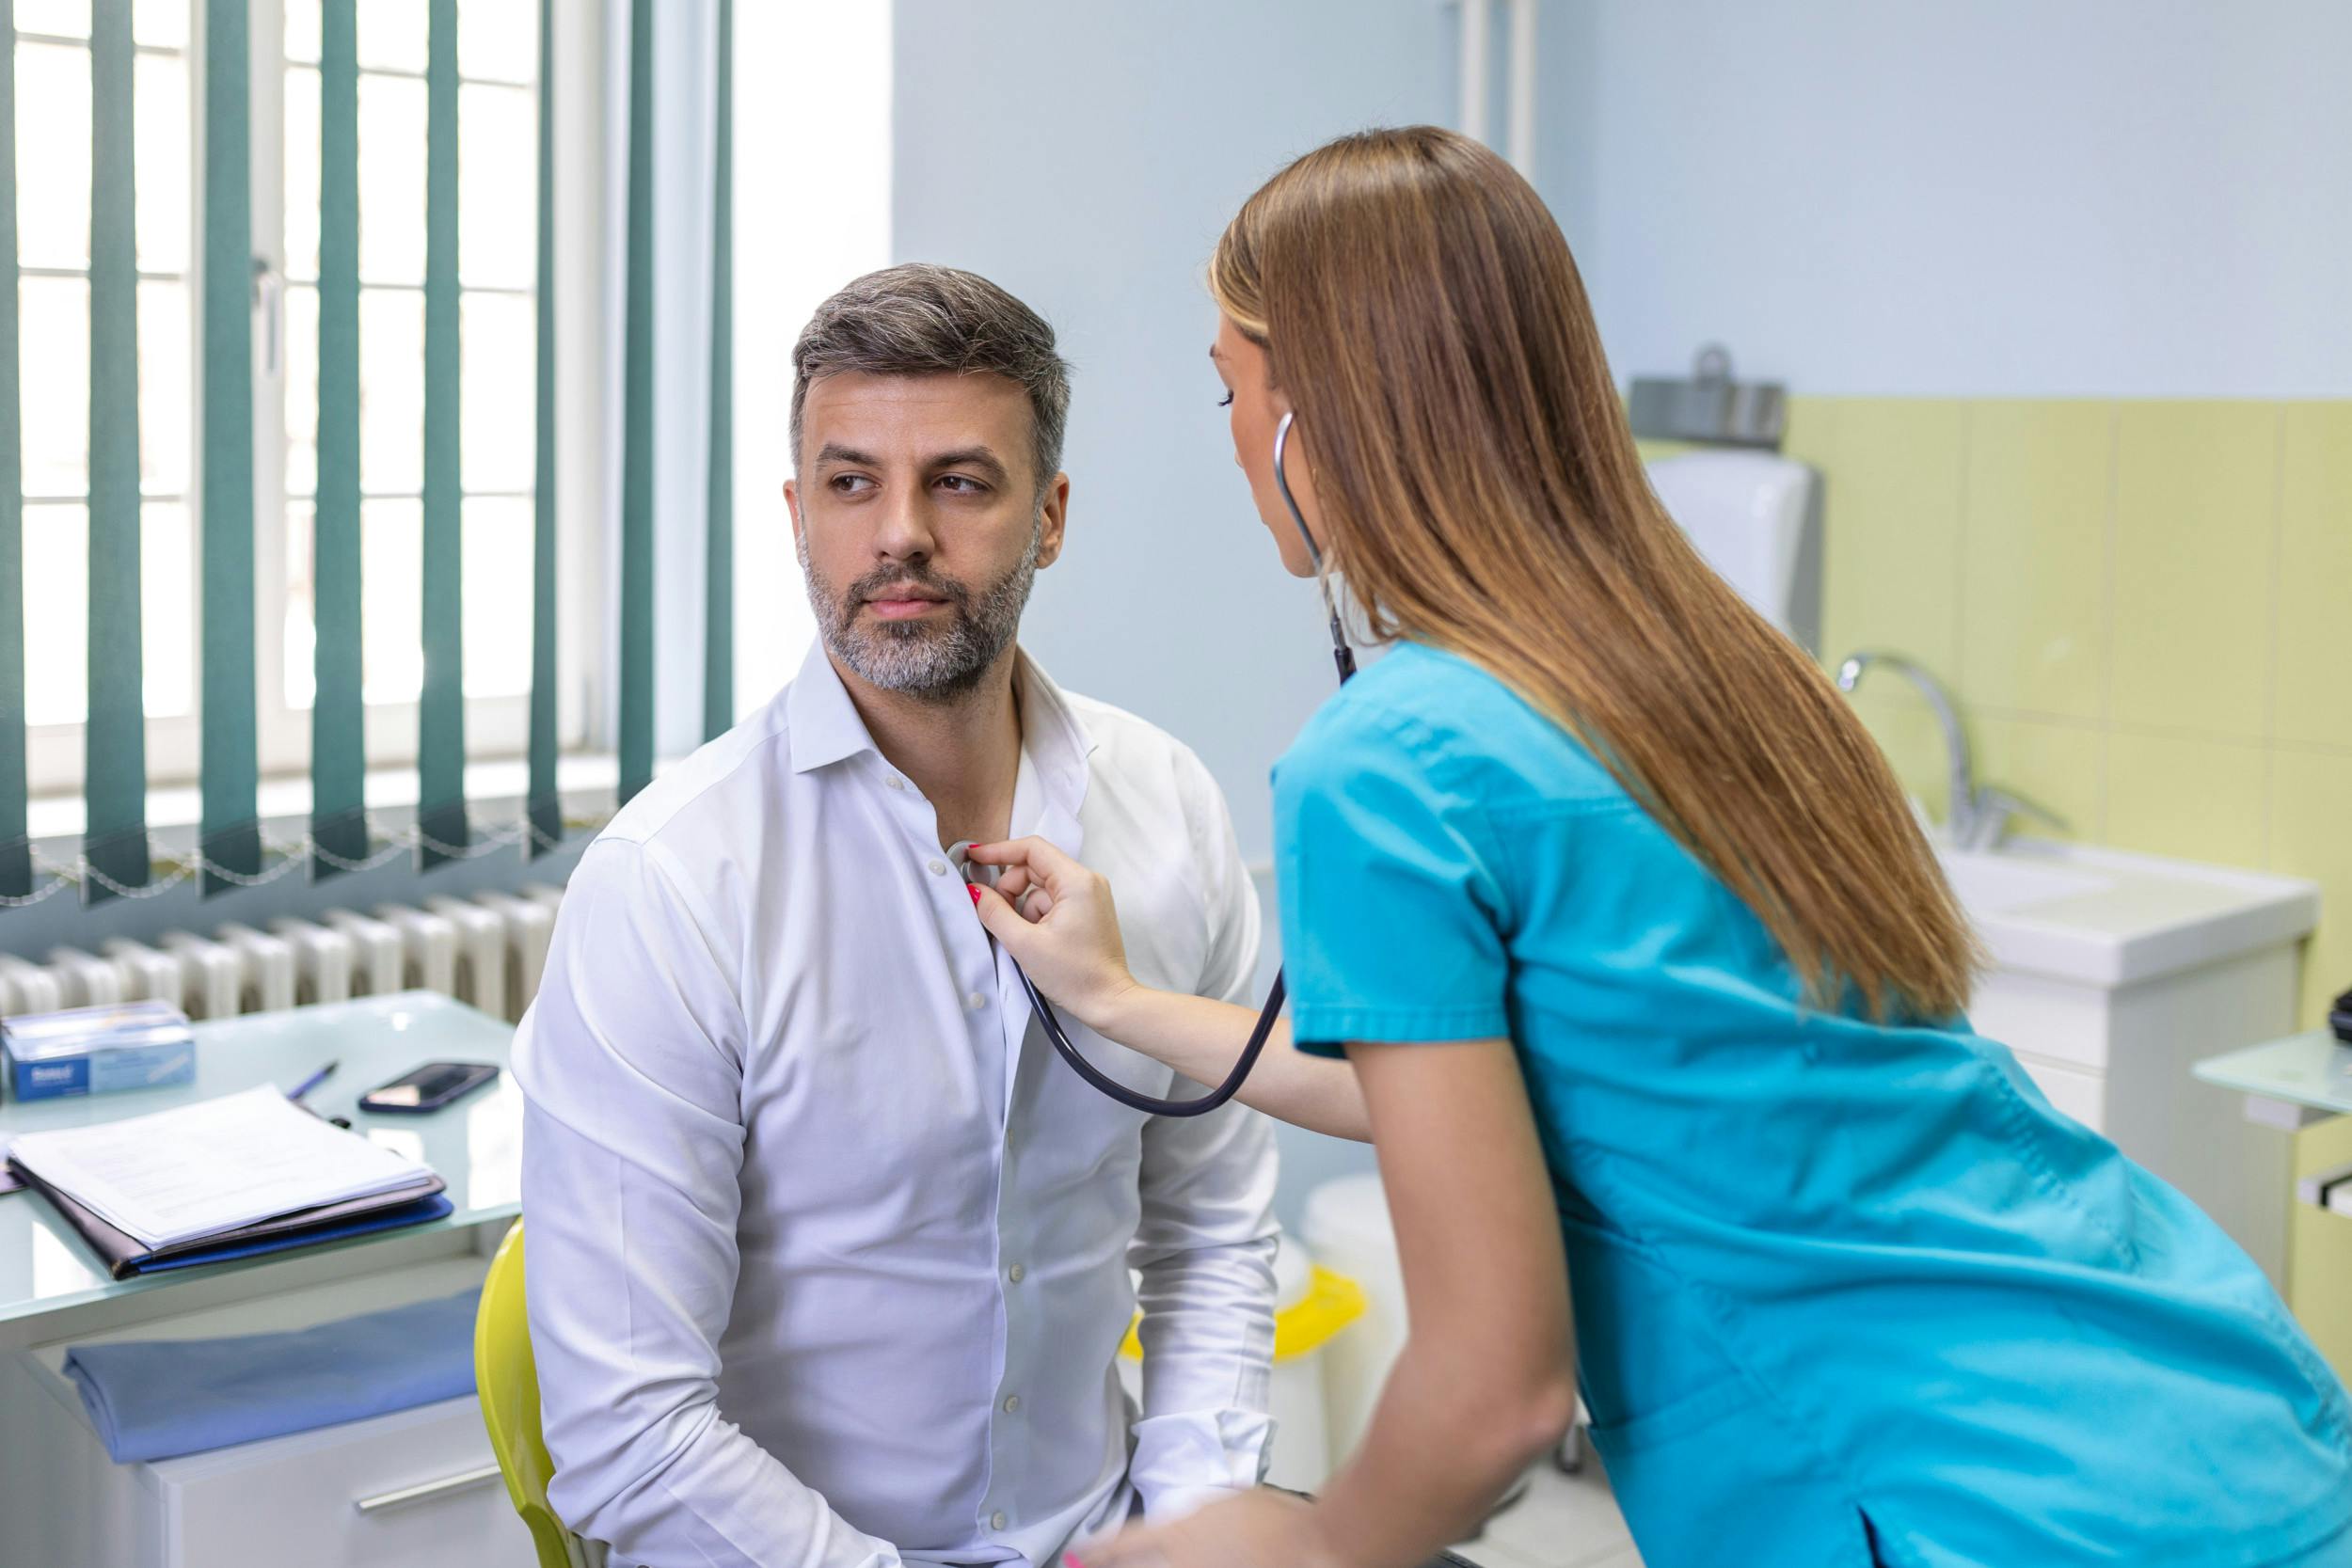 Routine Health Screenings: What Preventive Care Services Are You Missing?